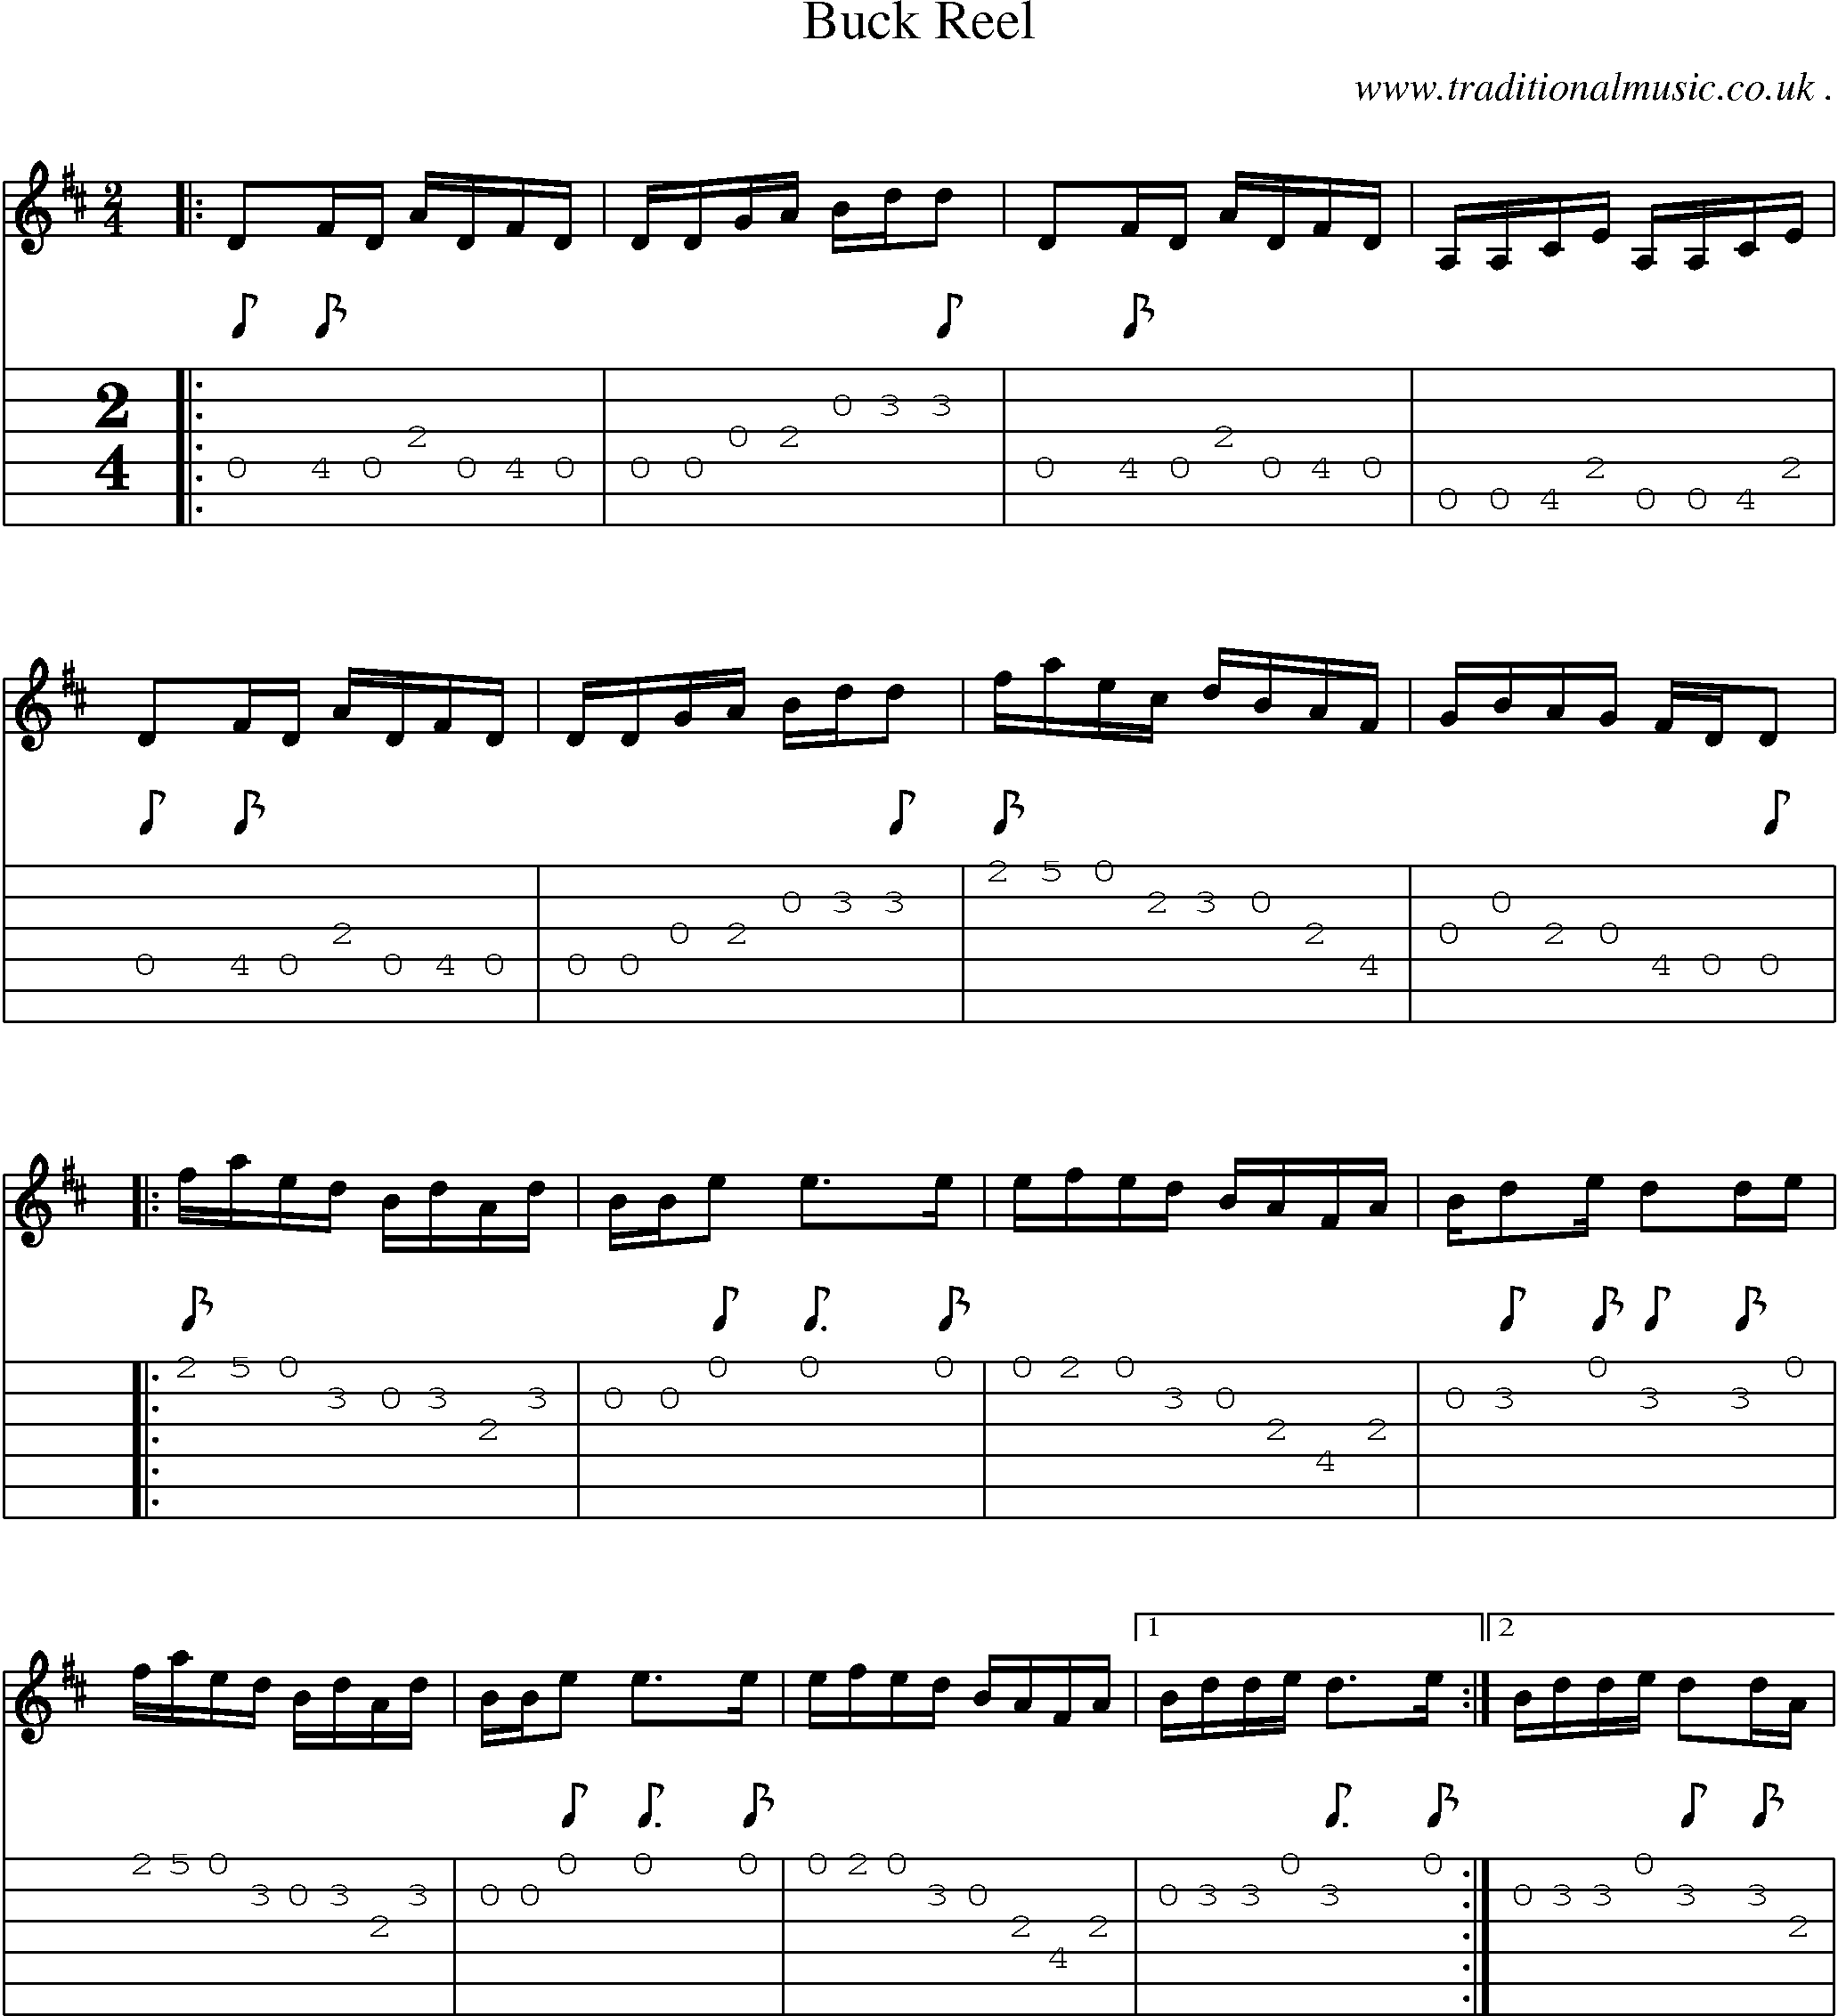 Music Score and Guitar Tabs for Buck Reel